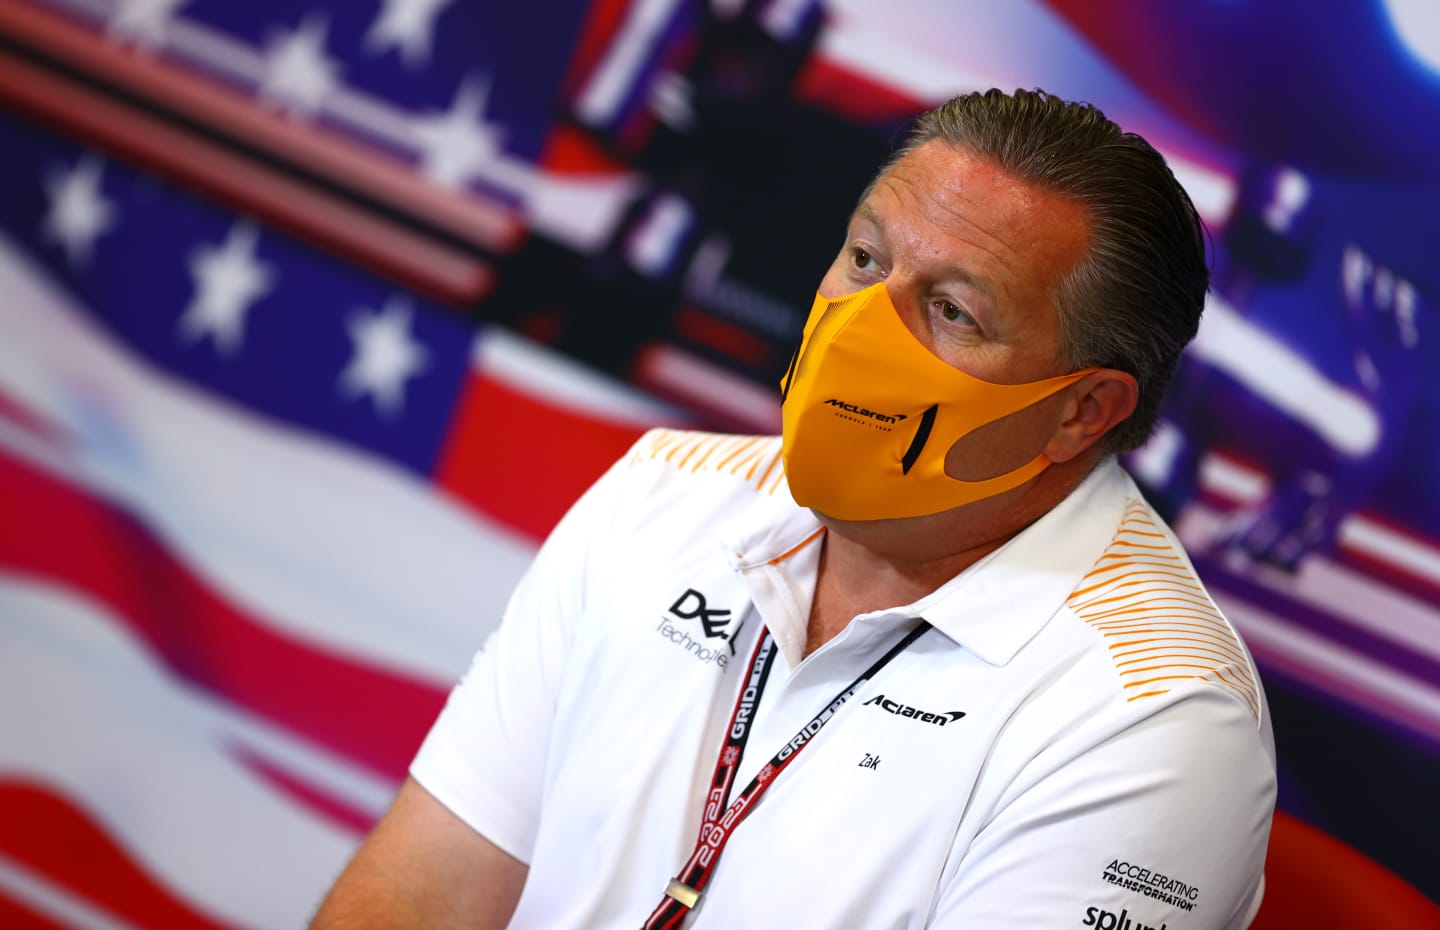 AUSTIN, TEXAS - OCTOBER 22: McLaren Chief Executive Officer Zak Brown talks in the Team Principals Press Conference during practice ahead of the F1 Grand Prix of USA at Circuit of The Americas on October 22, 2021 in Austin, Texas. (Photo by Dan Istitene/Getty Images)